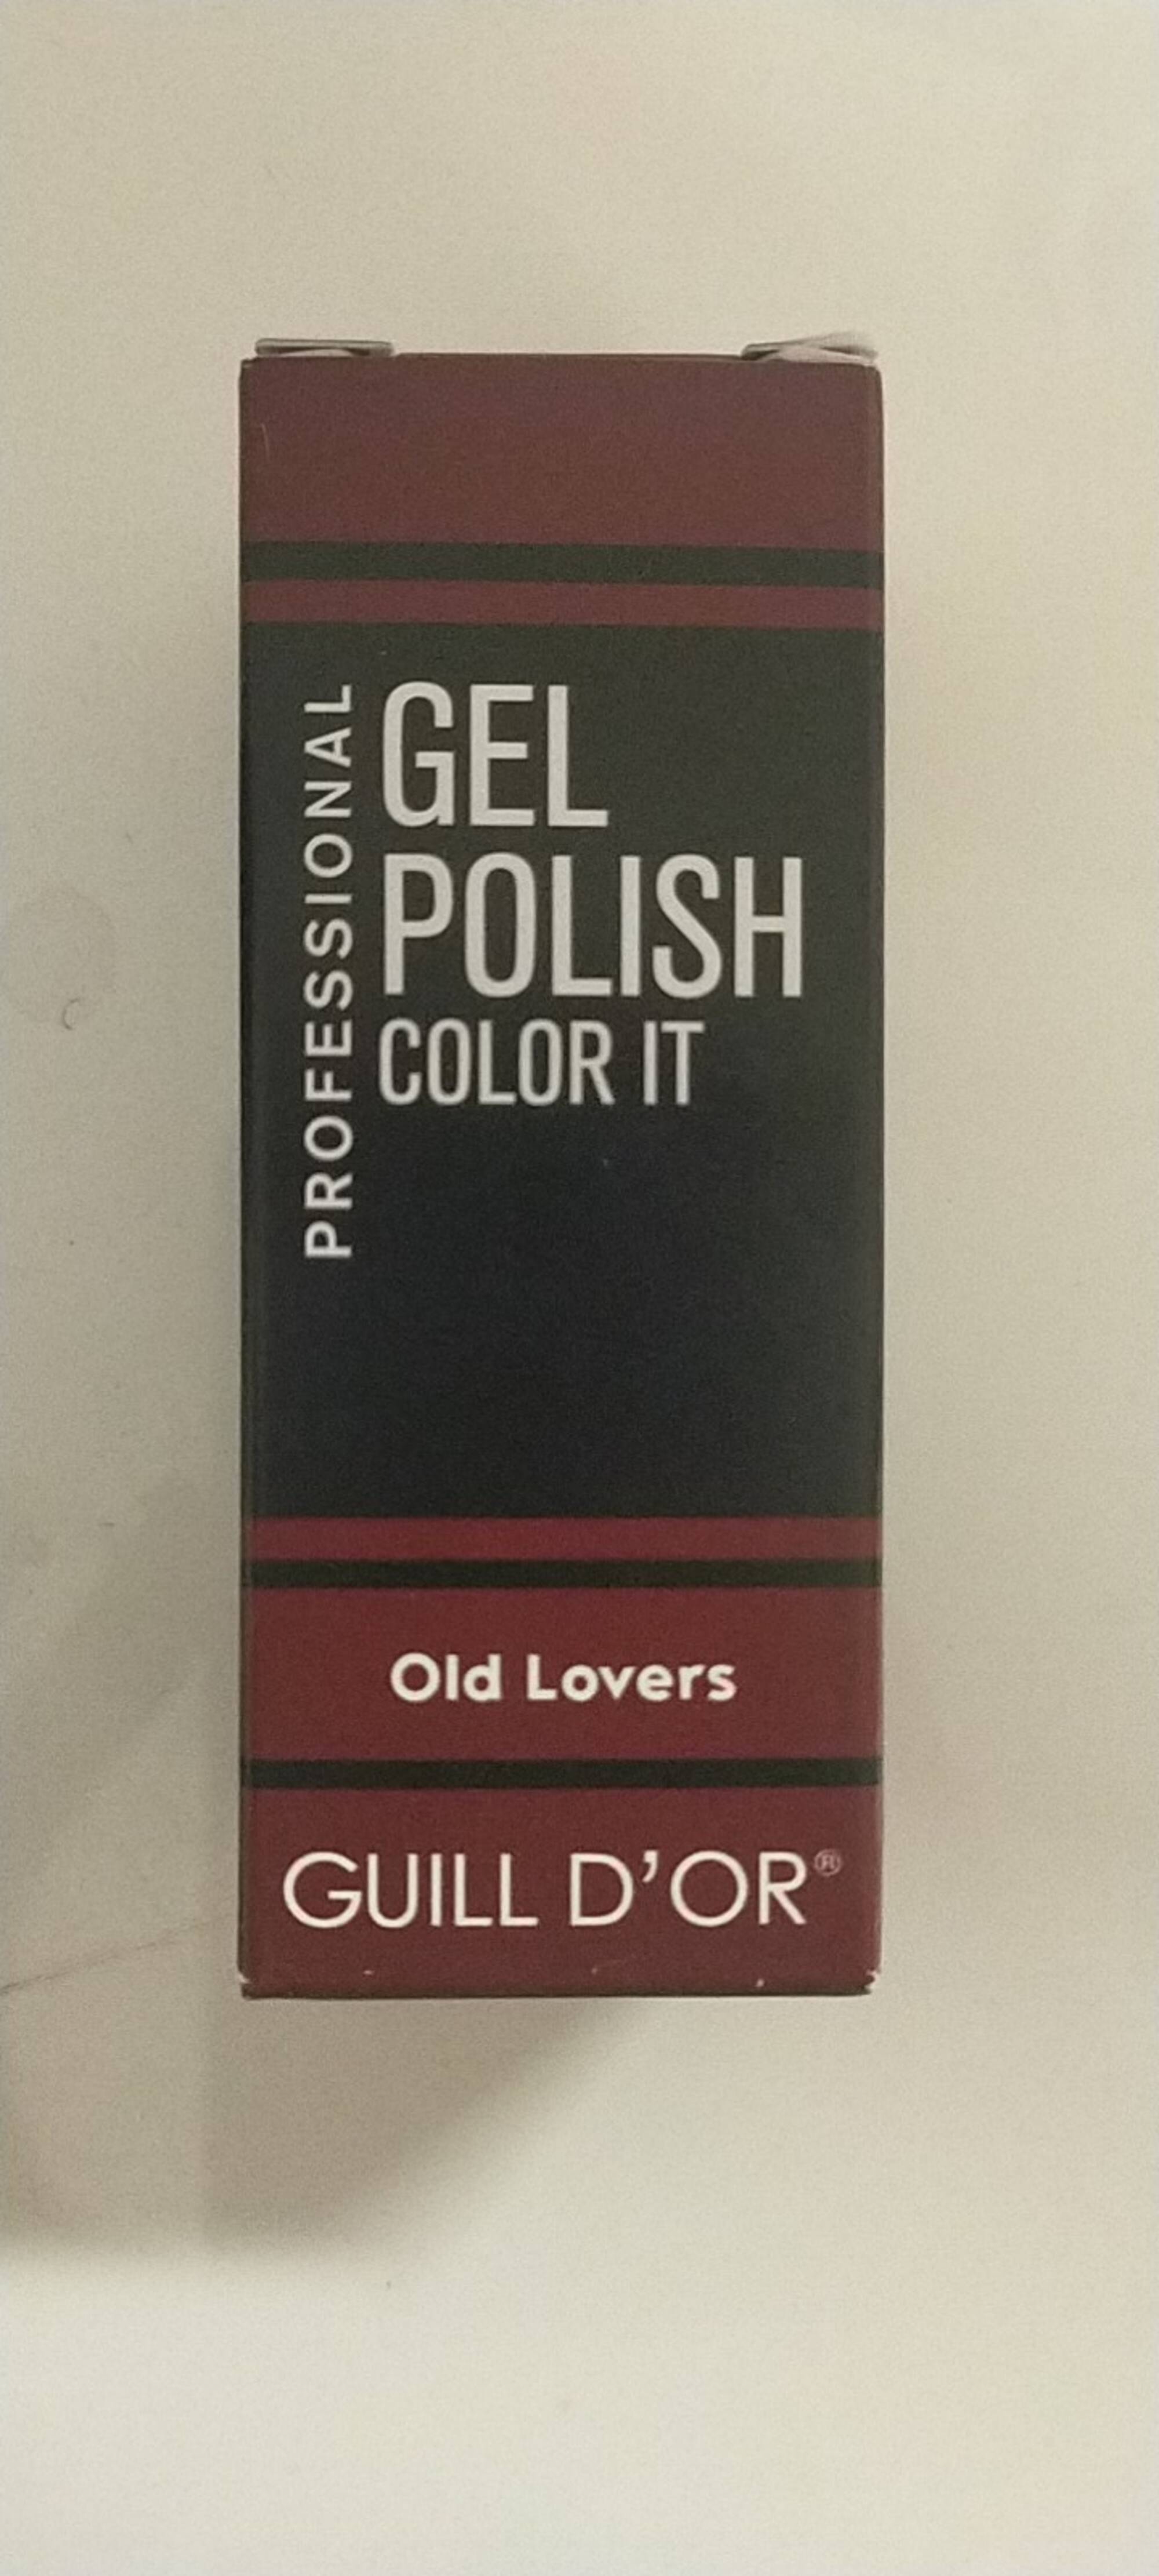 GUILL D'OR - Gel polish color it professional